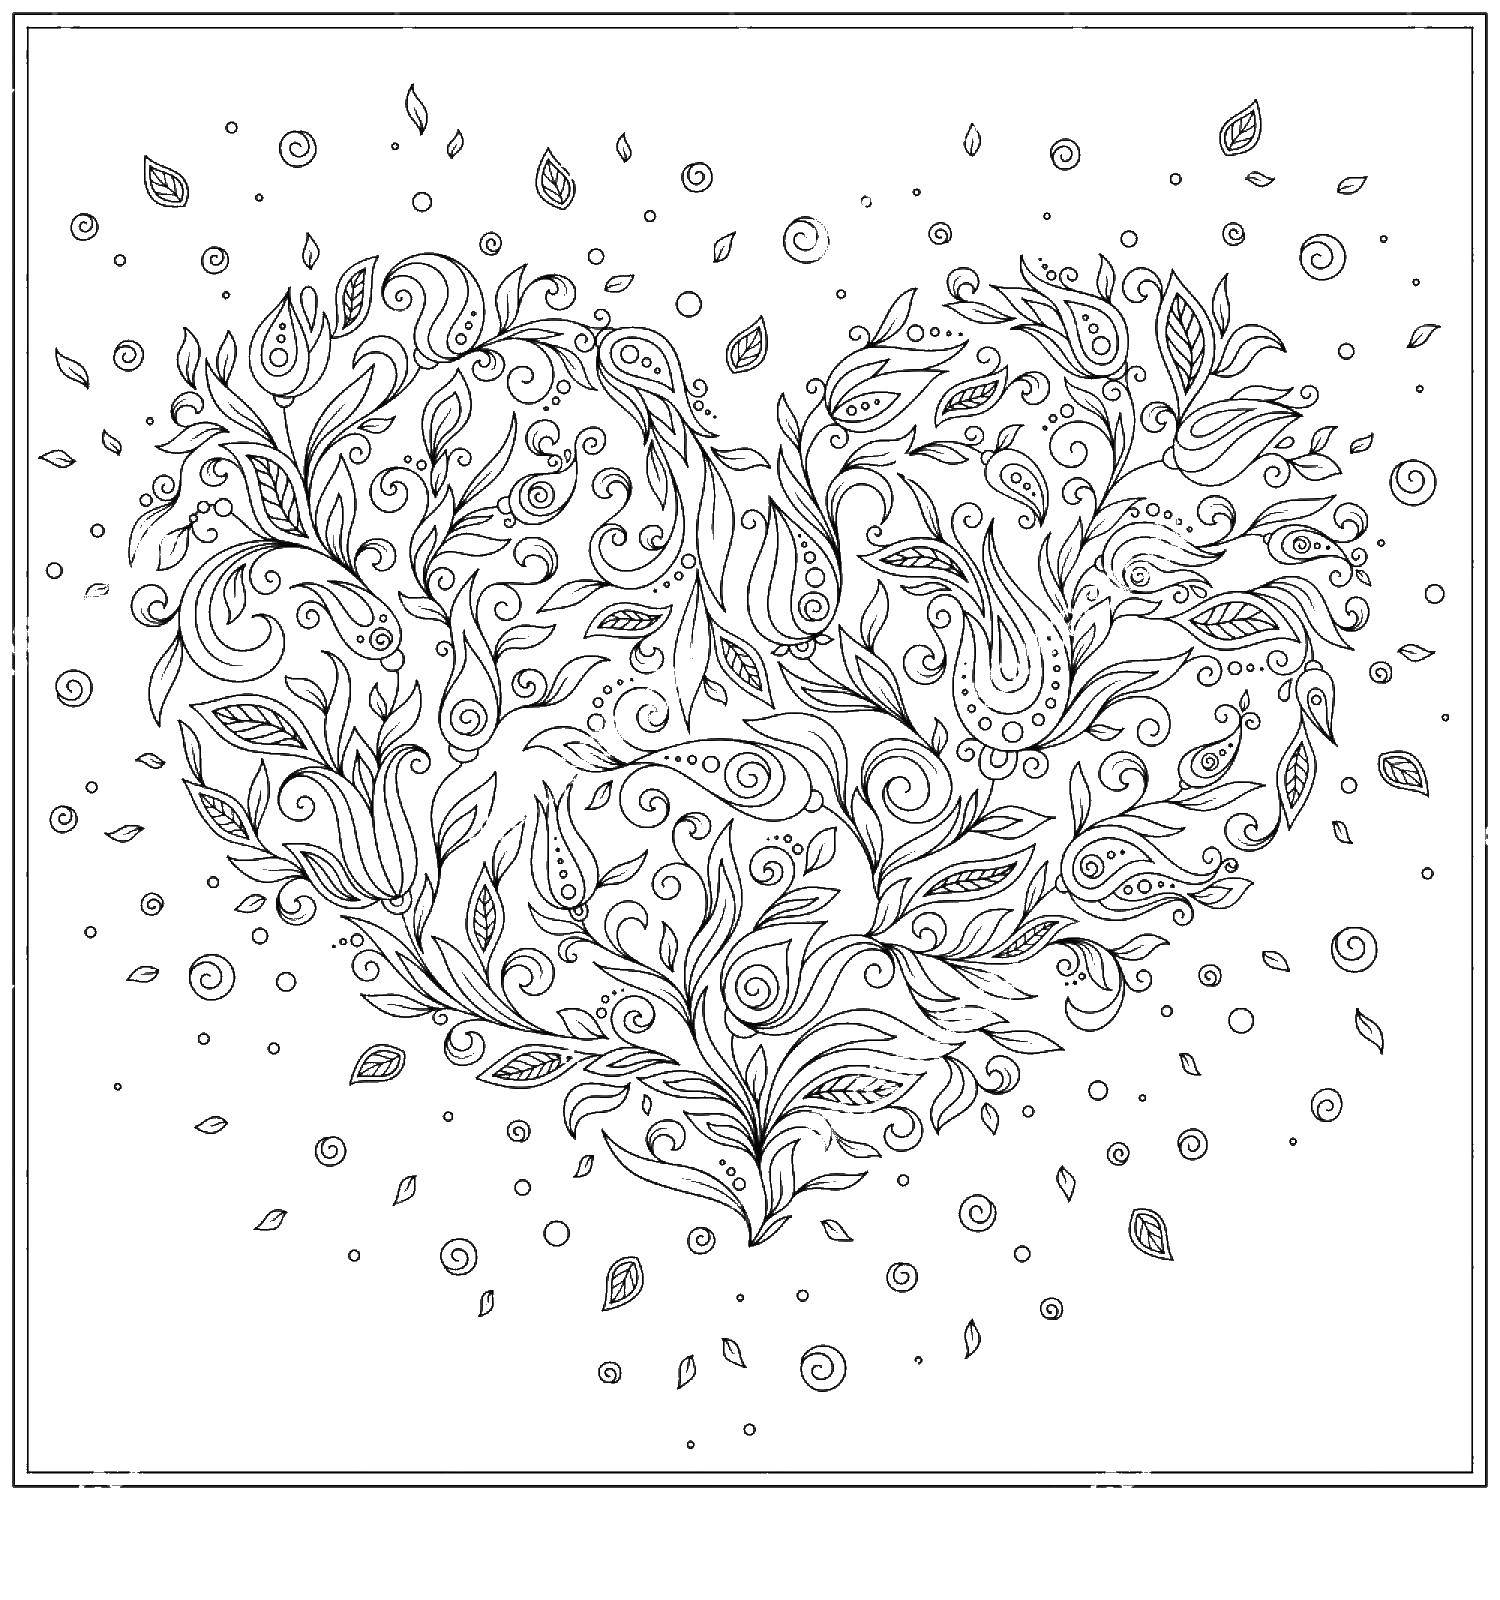 Coloring Heart from the petals. Category Hearts. Tags:  heart shape, petals.